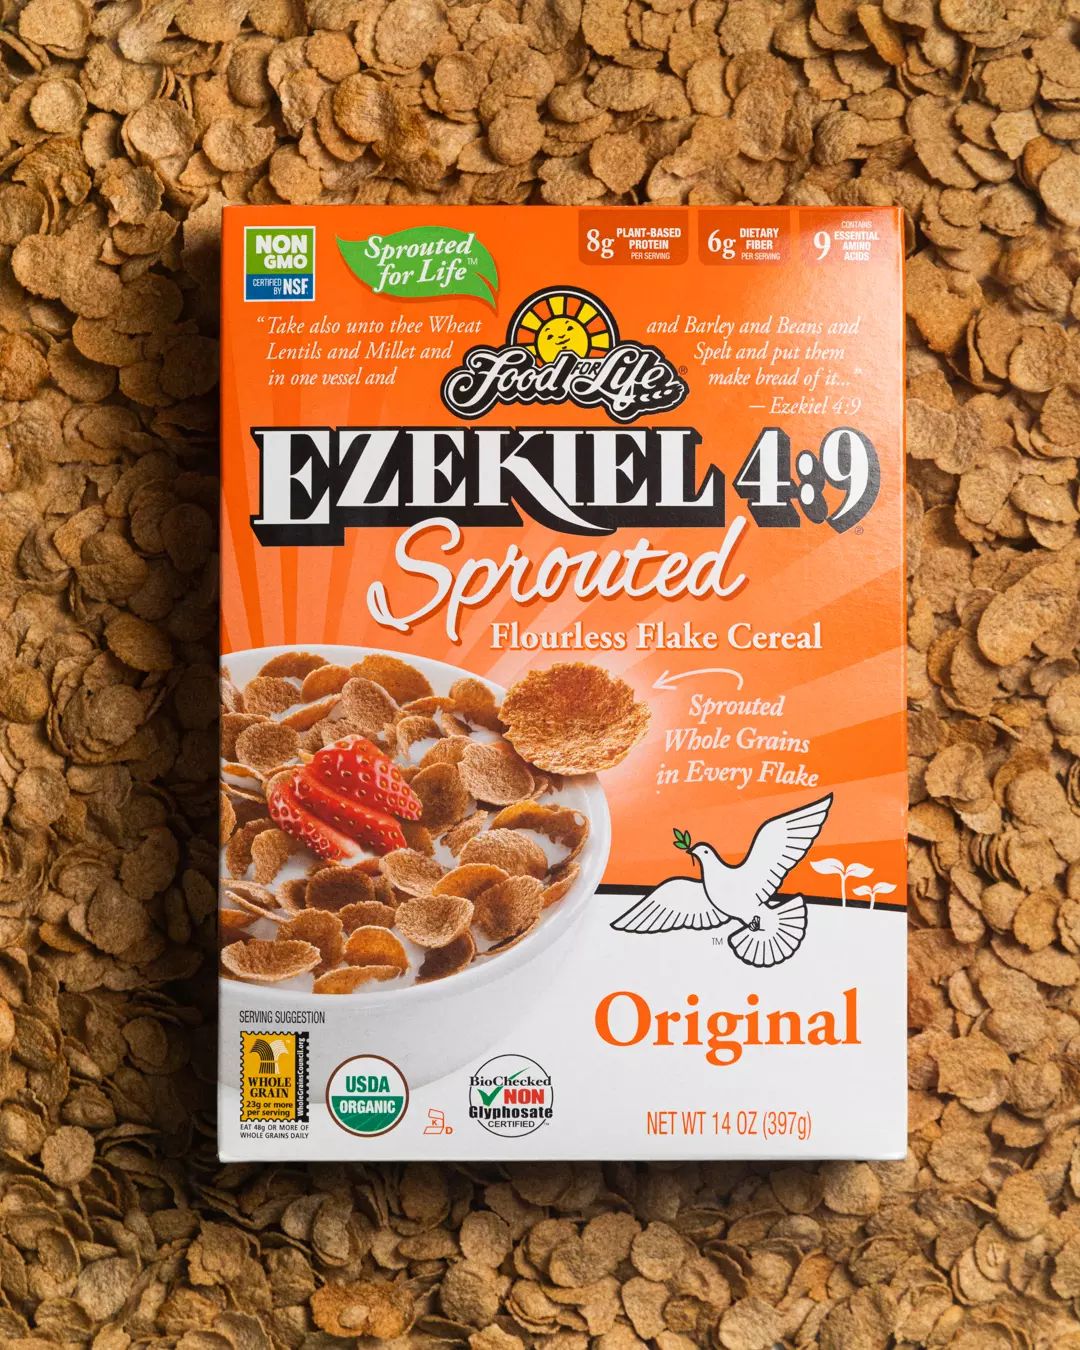 Food For Life cereal